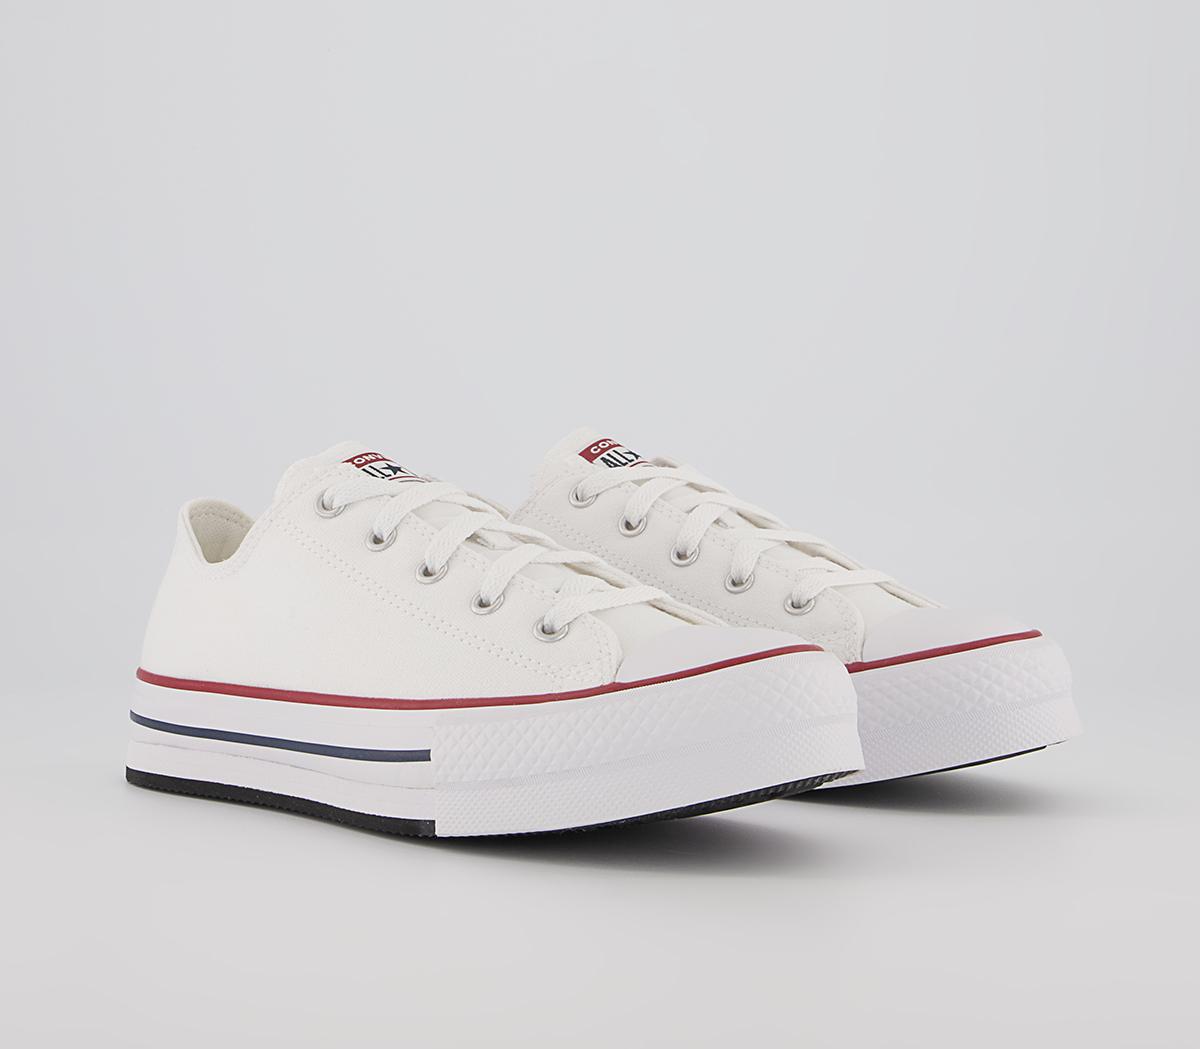 Converse Kids All Star Eva Lift Low Jnr Trainers Whte Garnet Navy In White, 4.5